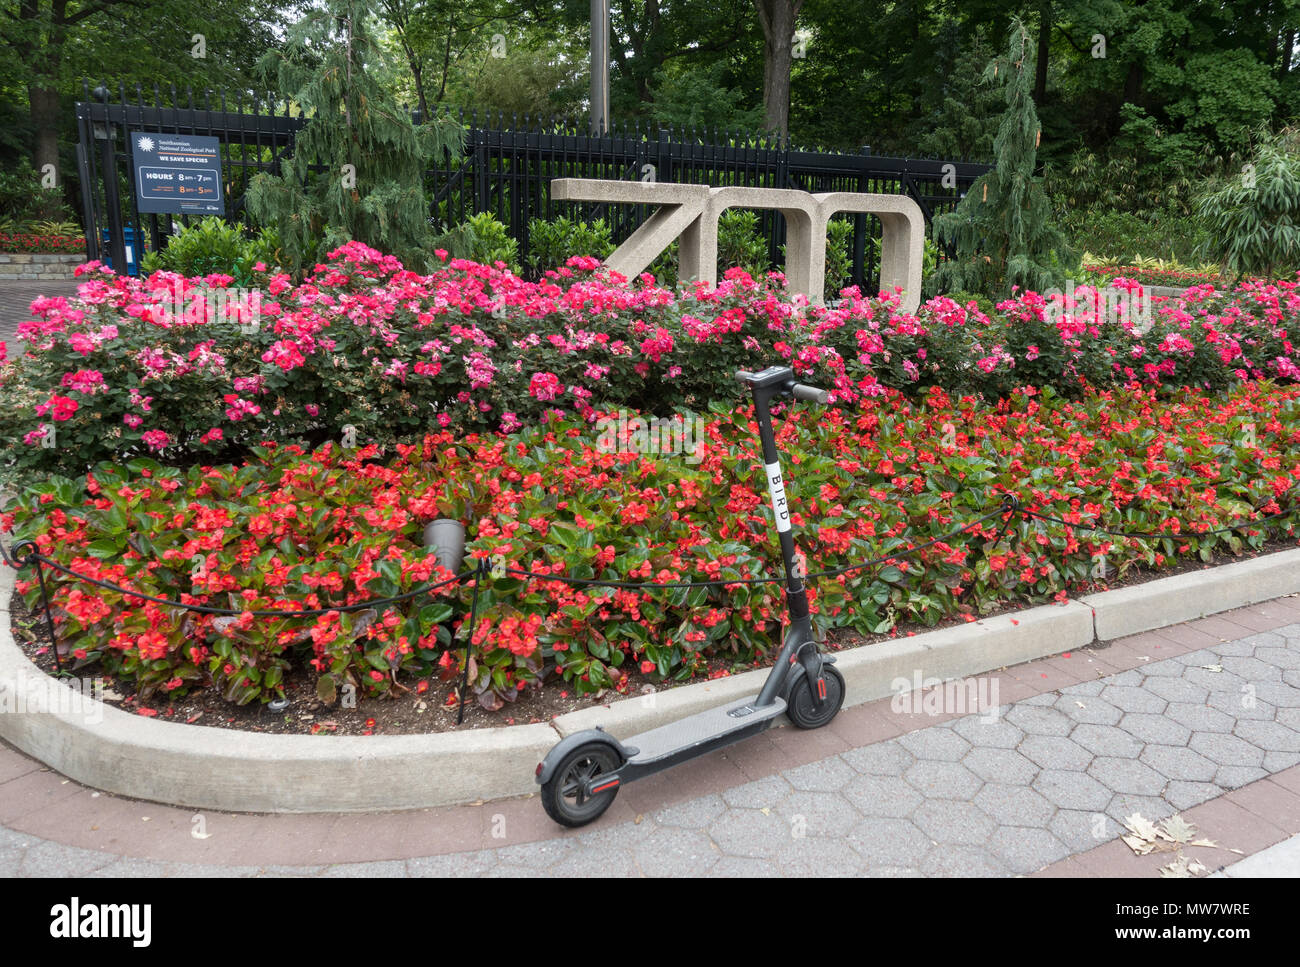 BIRD dockless scooter await riders at Zoo. BIRD, one of several dockless electric scooter companies in Washington, DC during 2018 trial period. Stock Photo